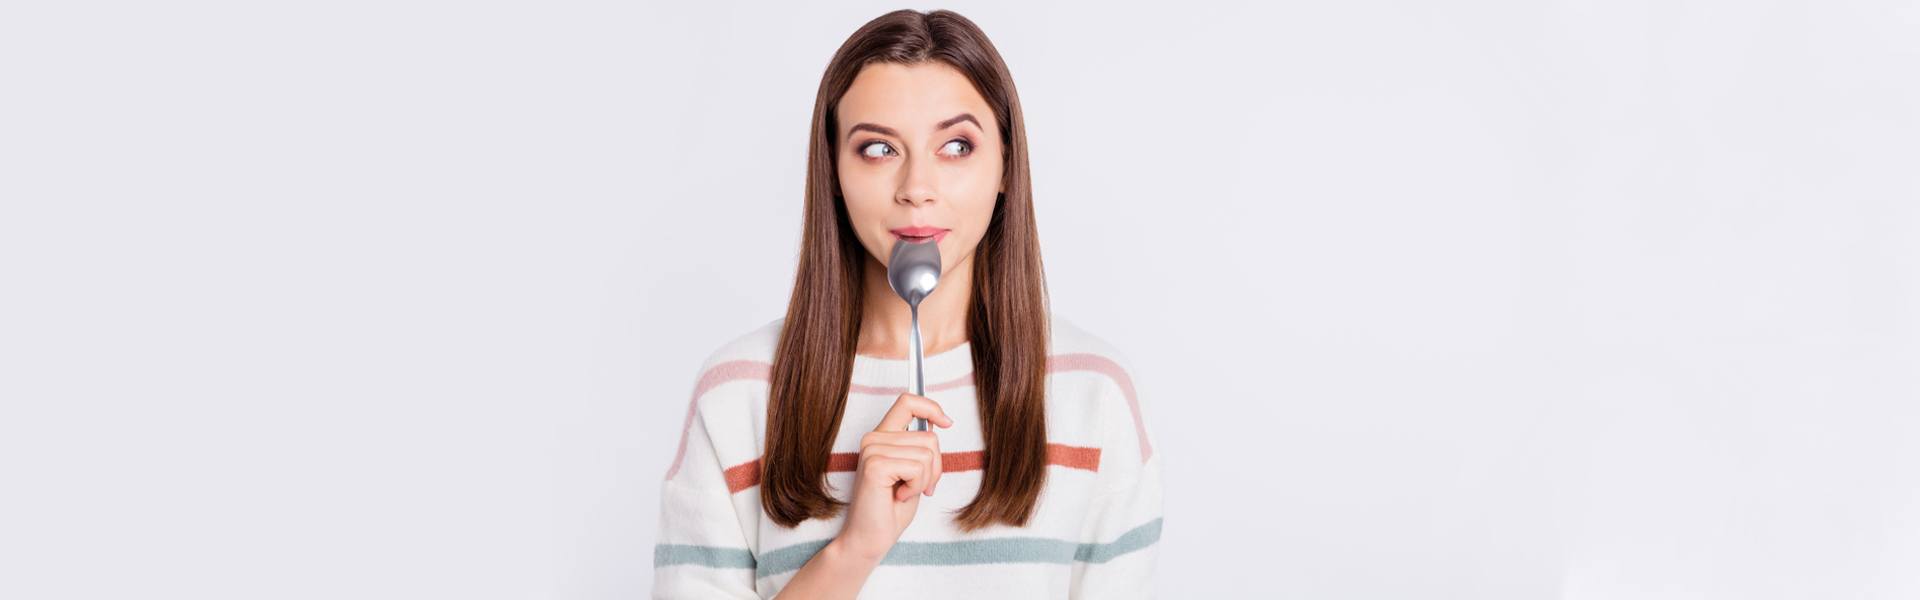 10 Reasons Why You Have Metallic Taste in Your Mouth - Glenn C. DelaRoca DDS